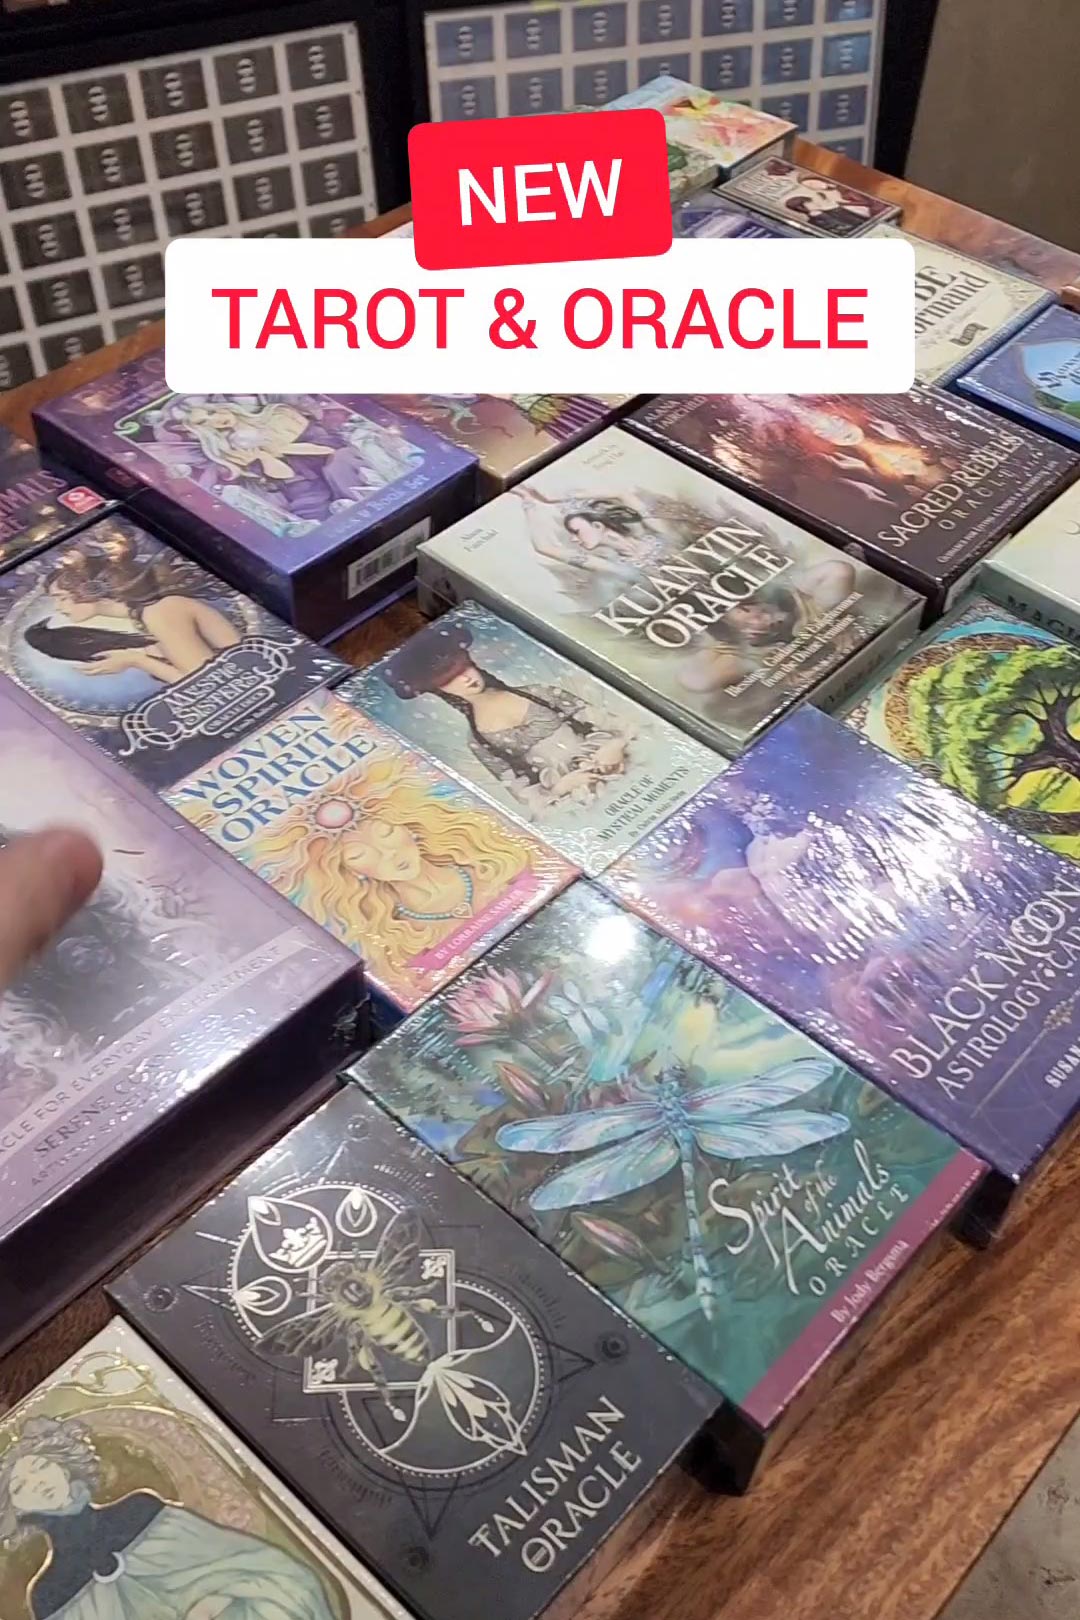 Another batch of new and restocked tarot, oracle, and lenormand decks!